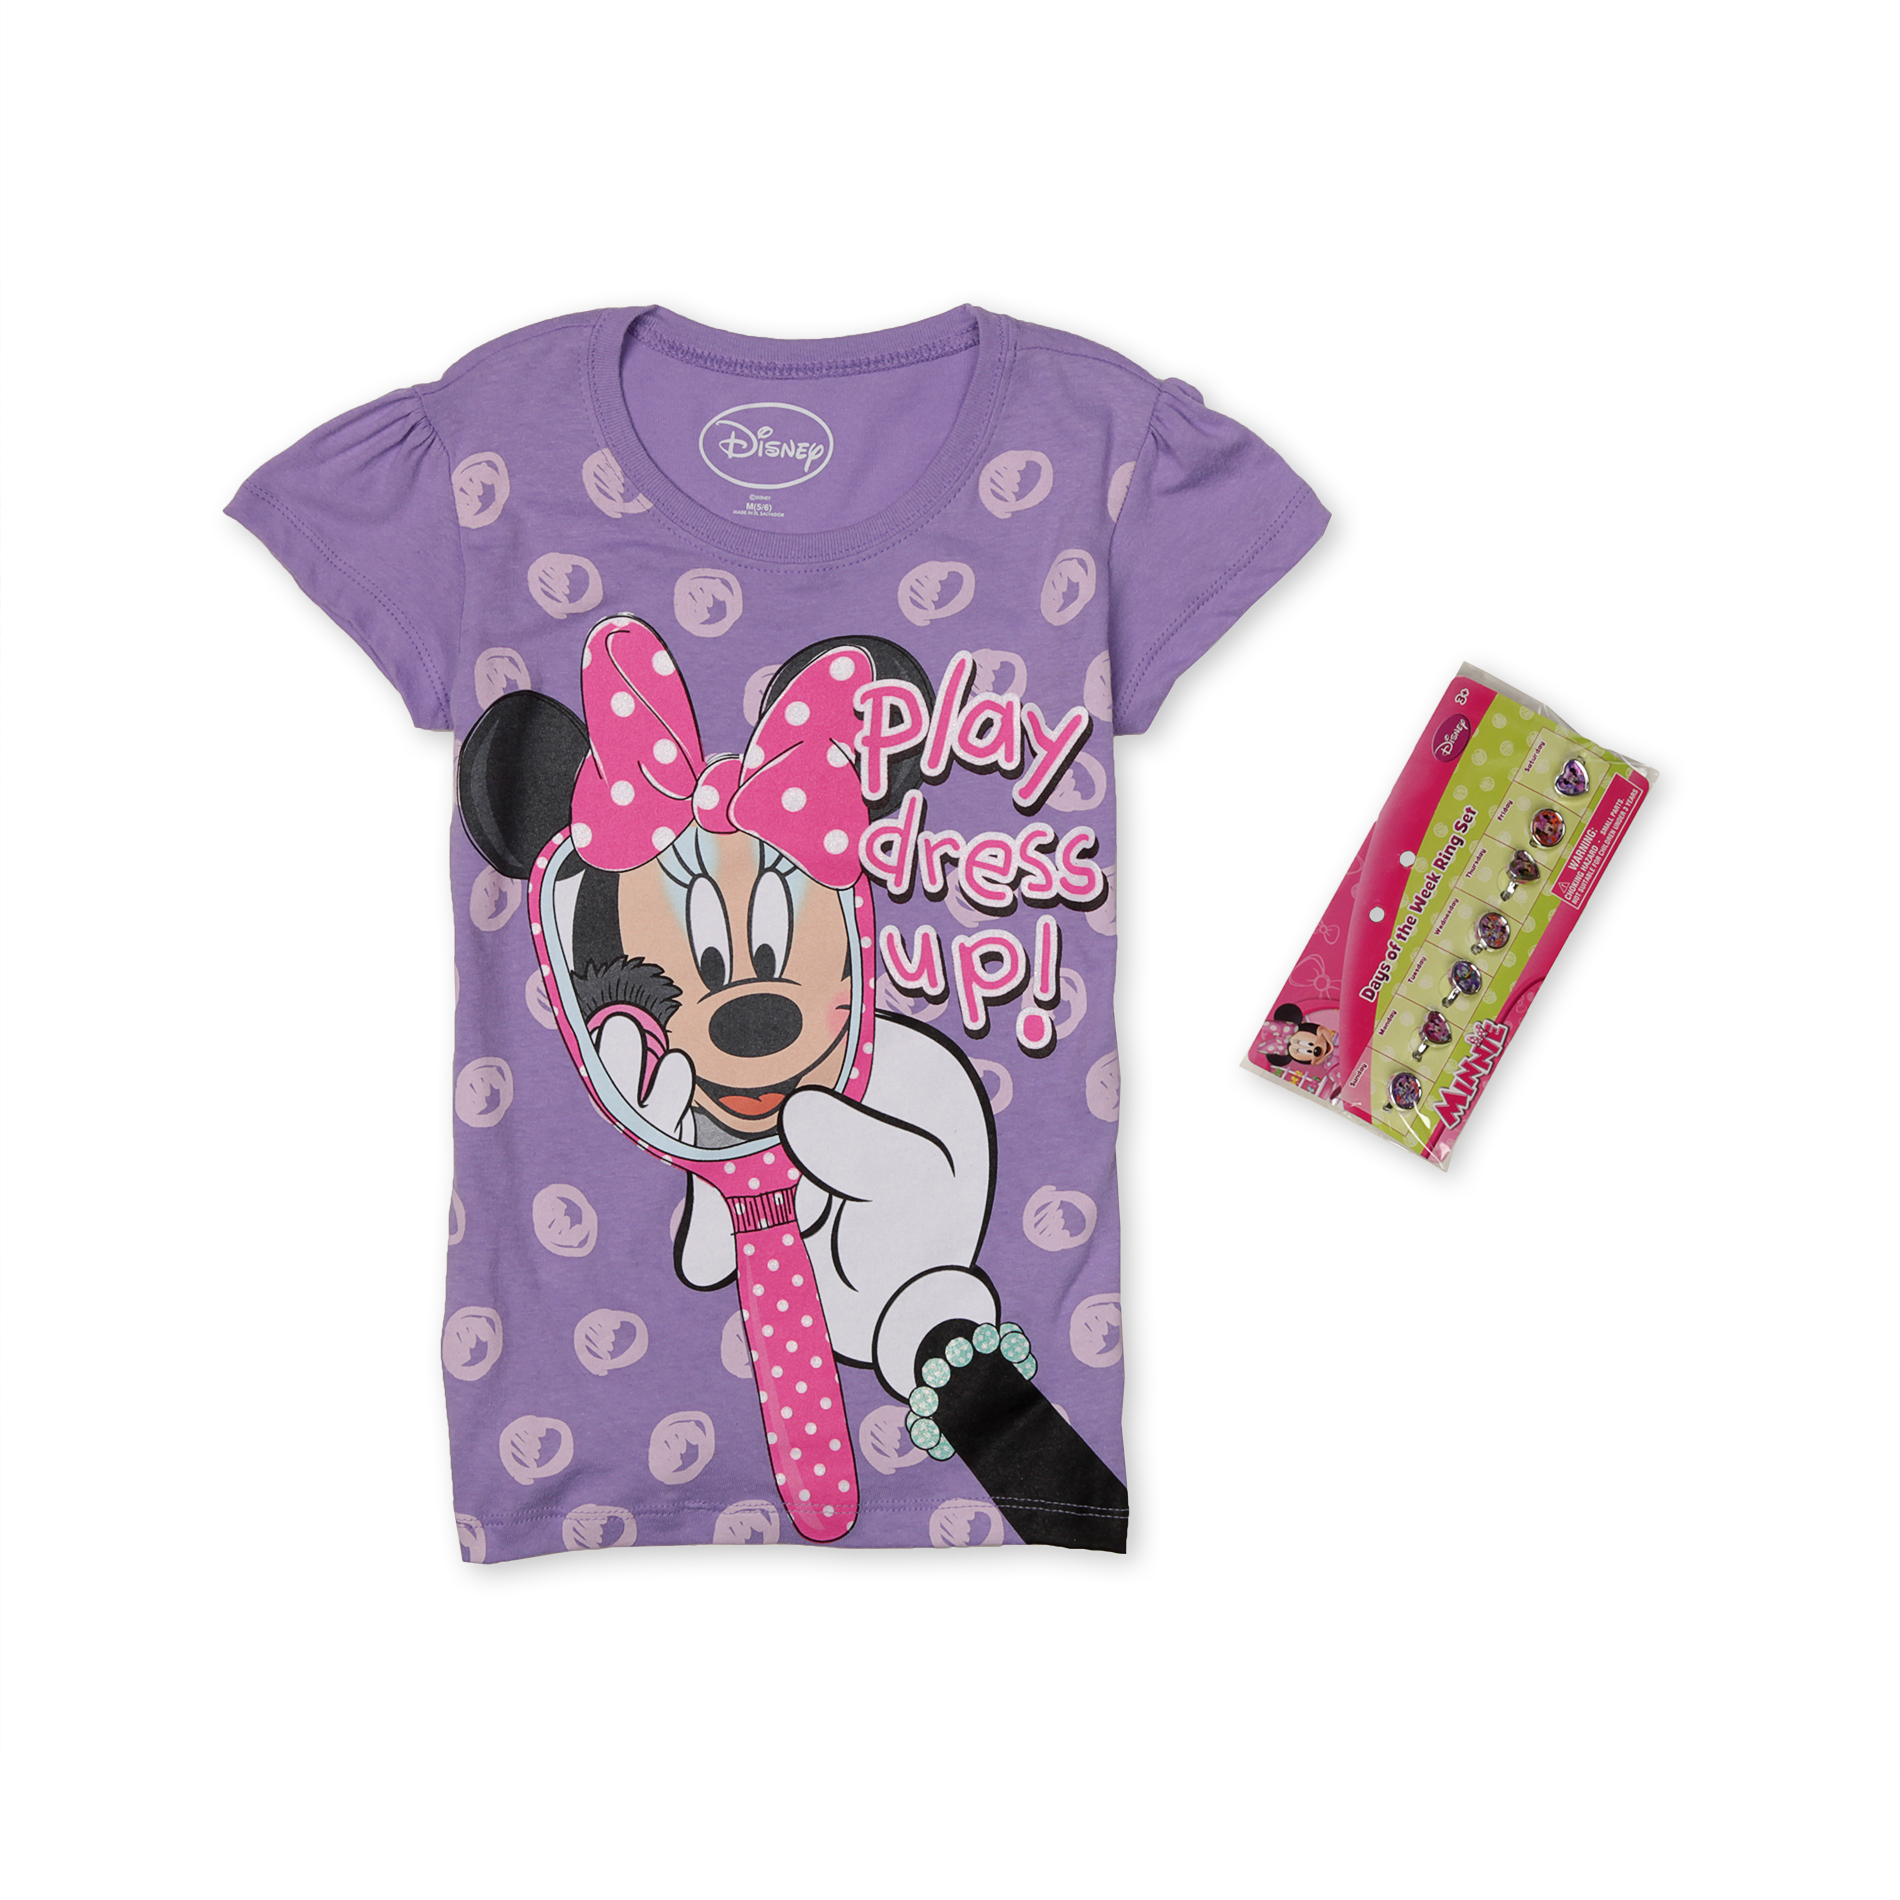 Disney Minnie Mouse Girl's Top & Fashion Rings - Dress Up